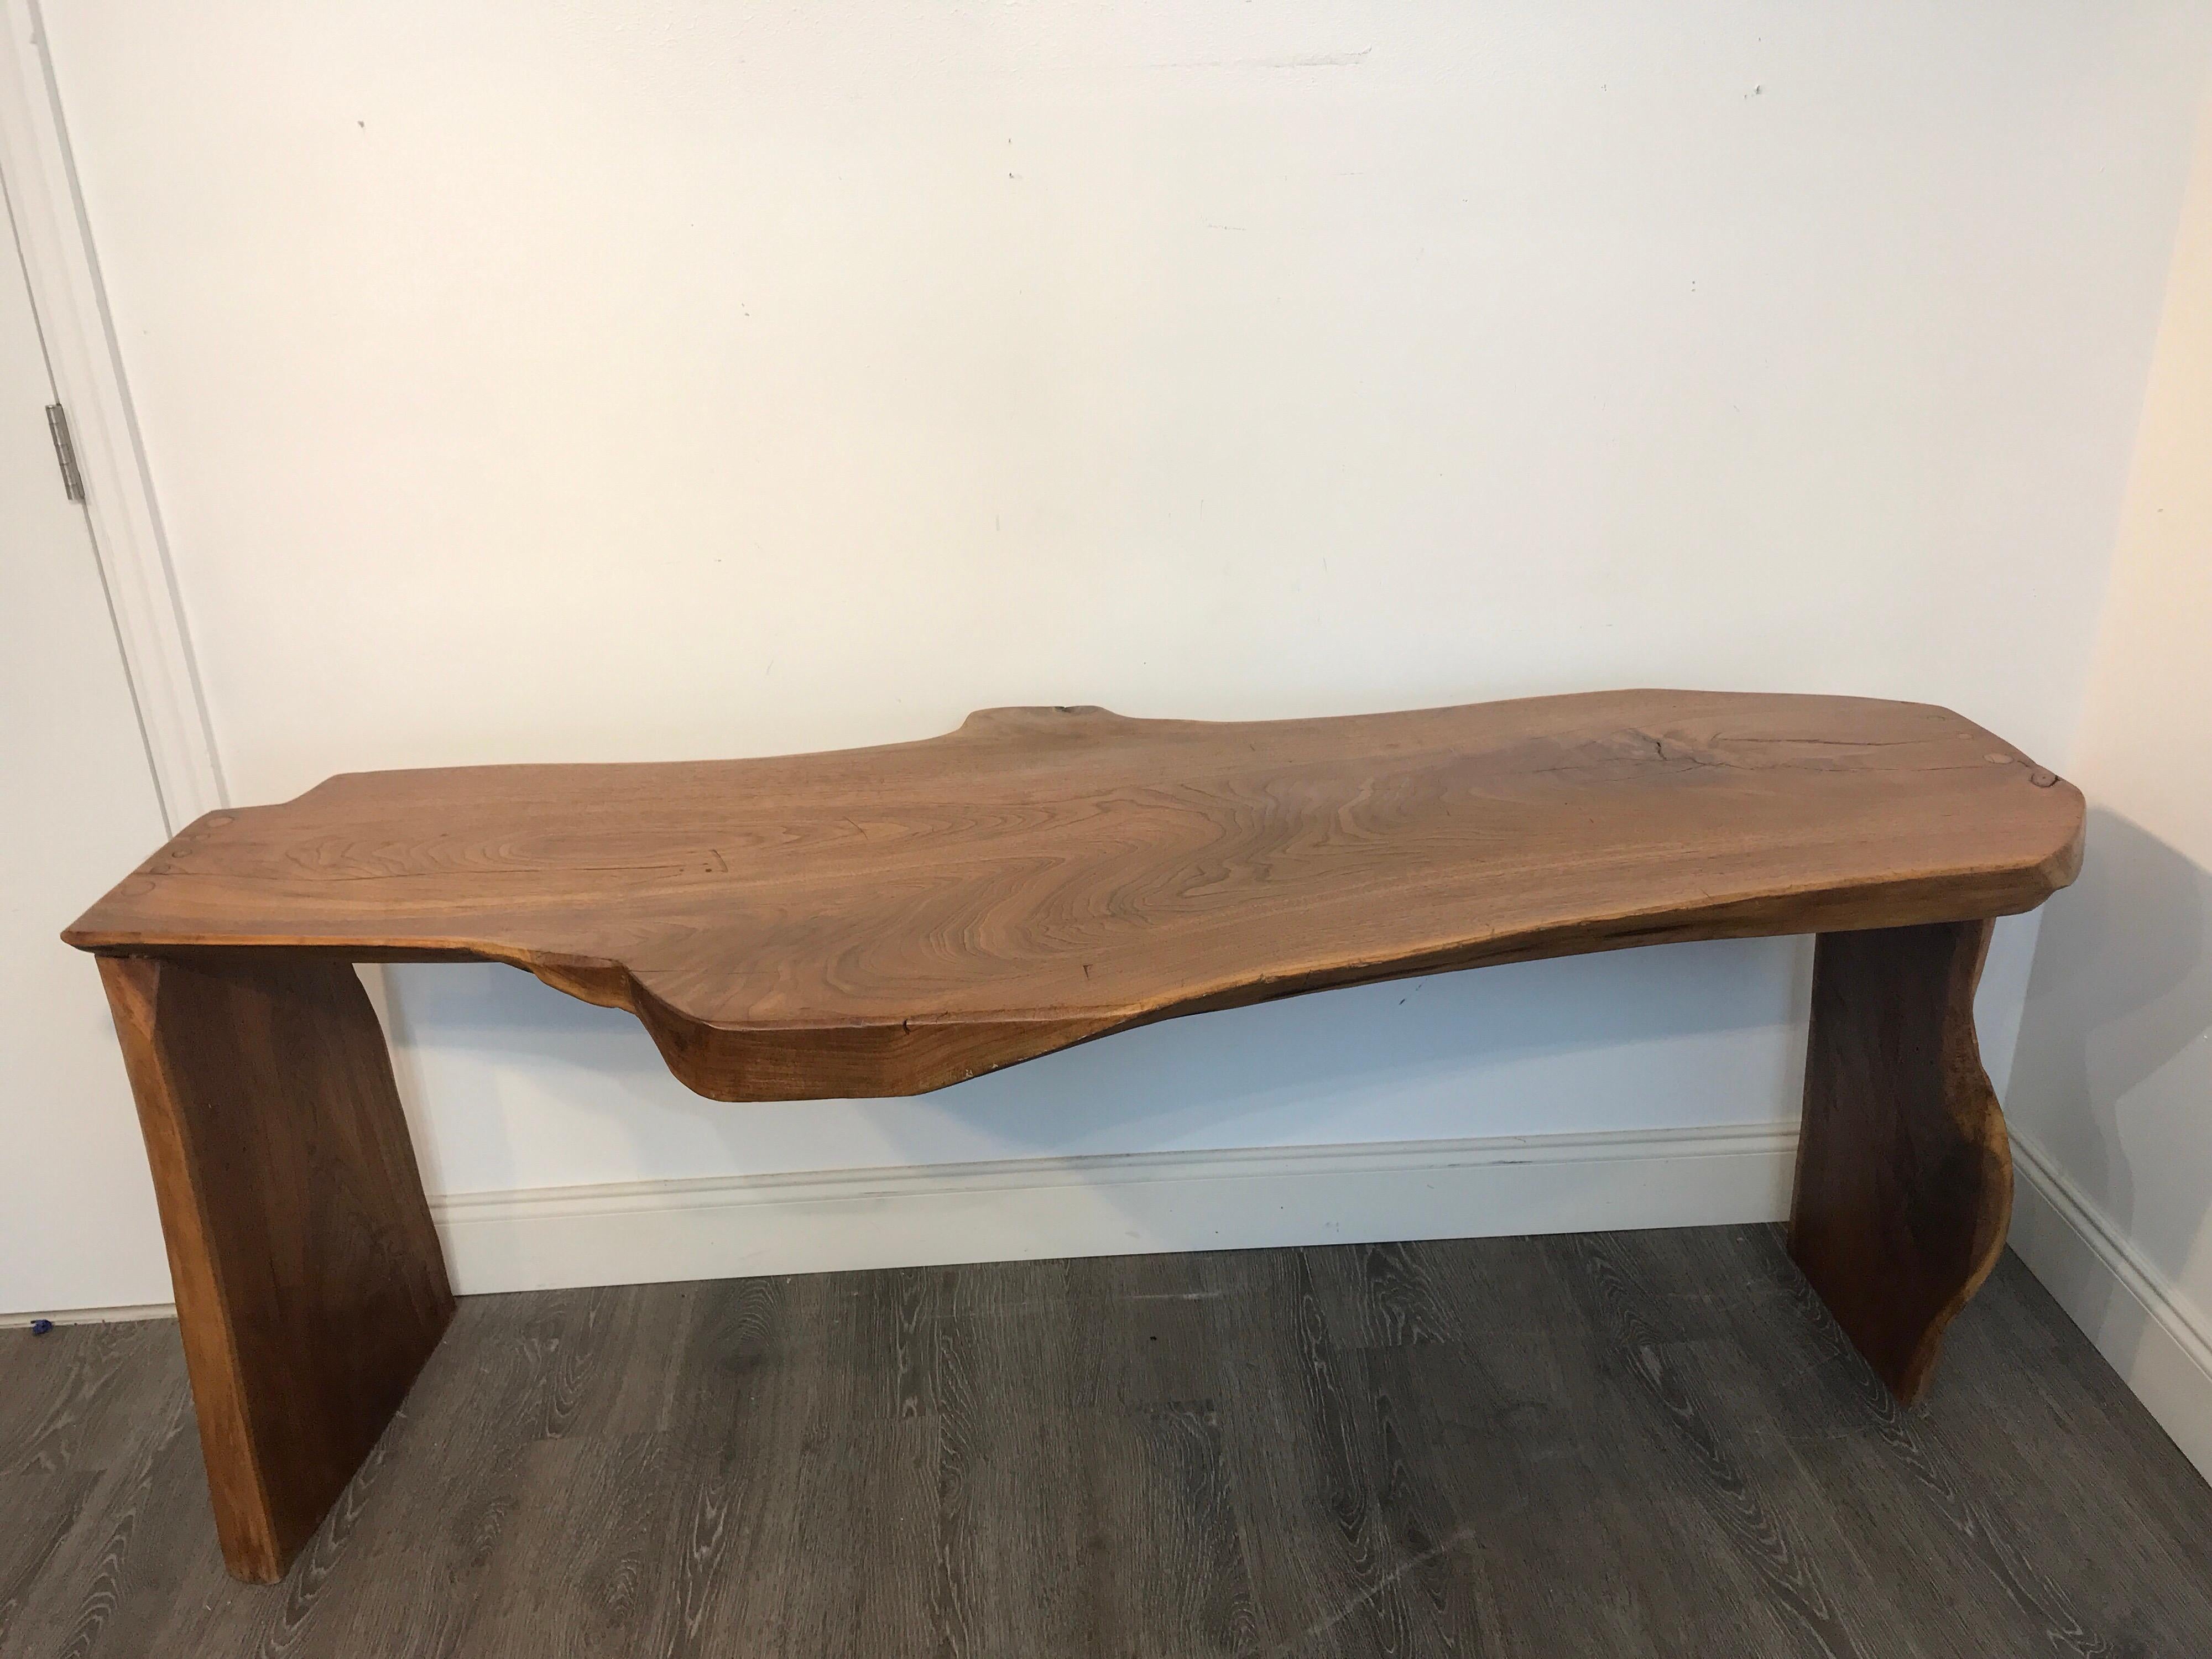 Stunning midcentury live edge walnut slab console table, beautiful pegged construction. The organic form the top widths are approximately 19.5